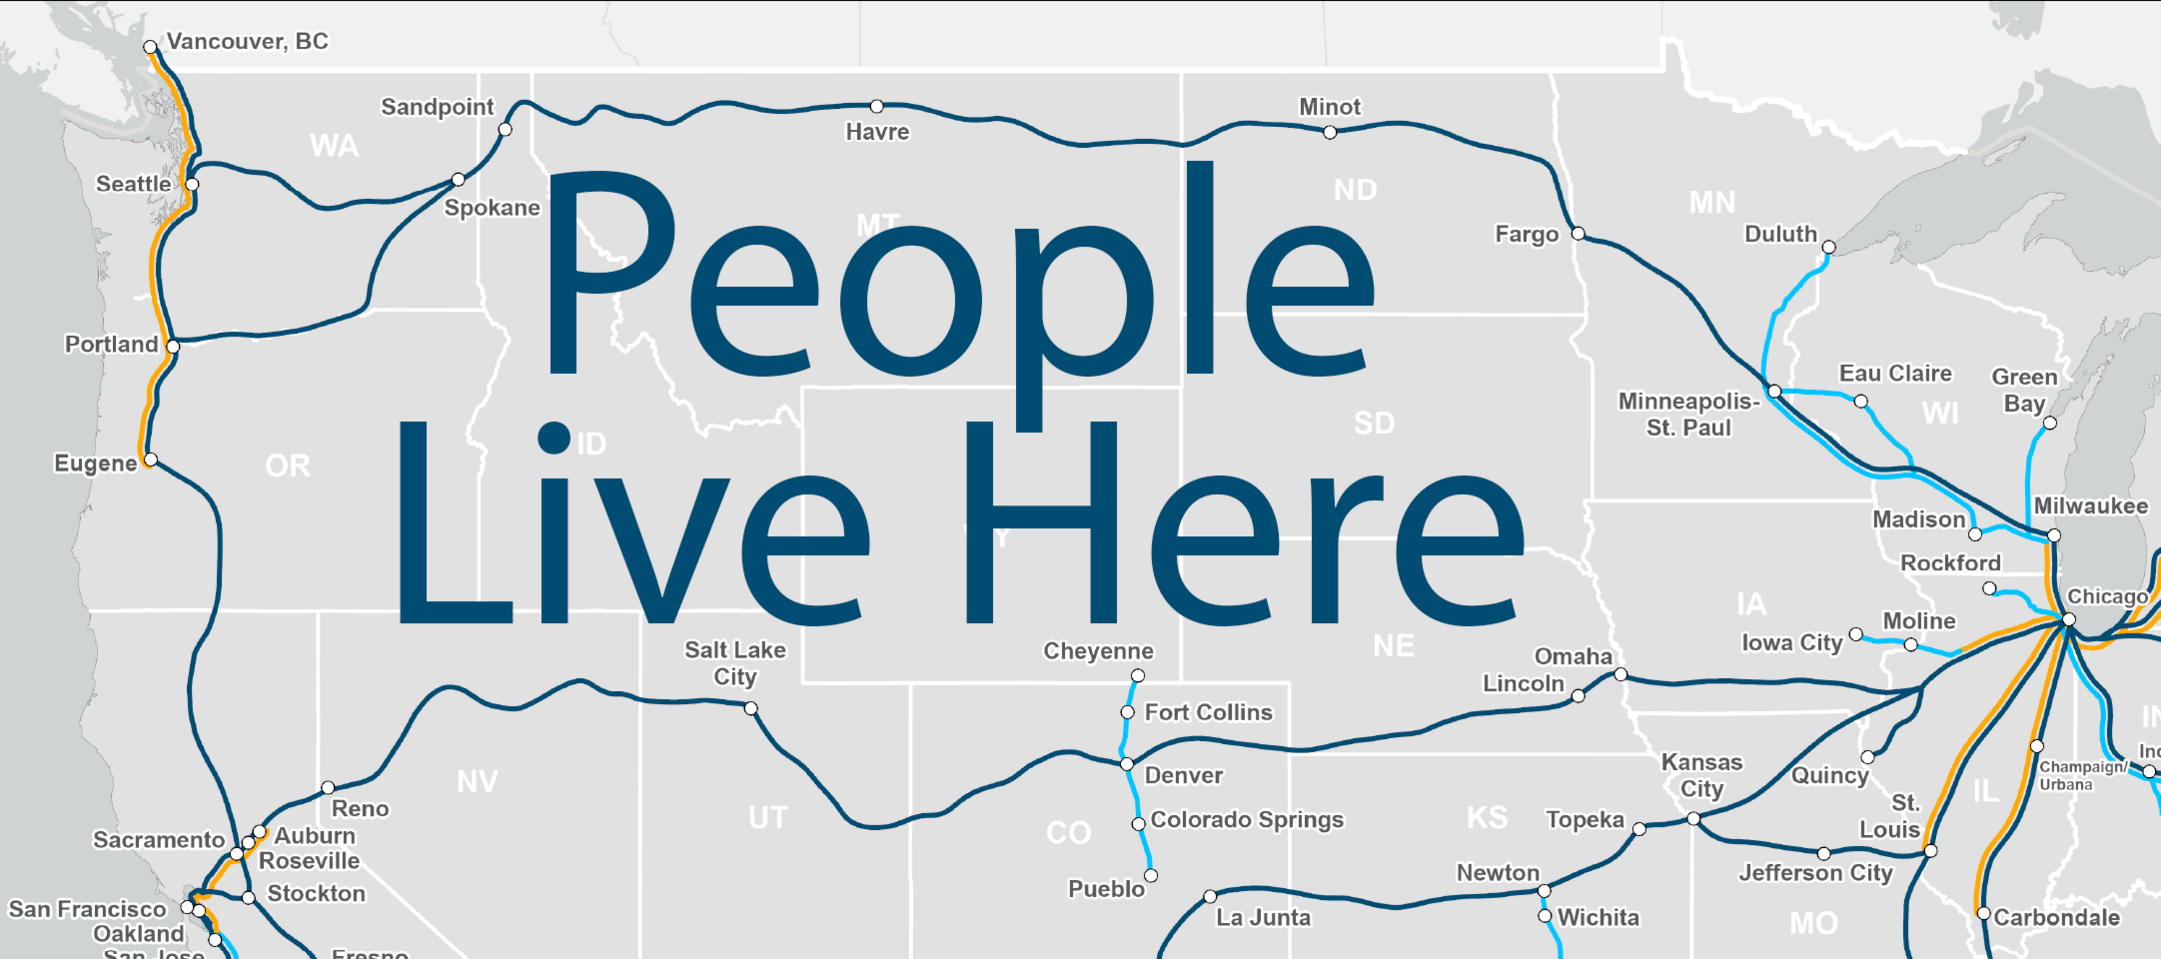 Map showing skeletal service in the Northwest, with "People Live Here" superimposed.